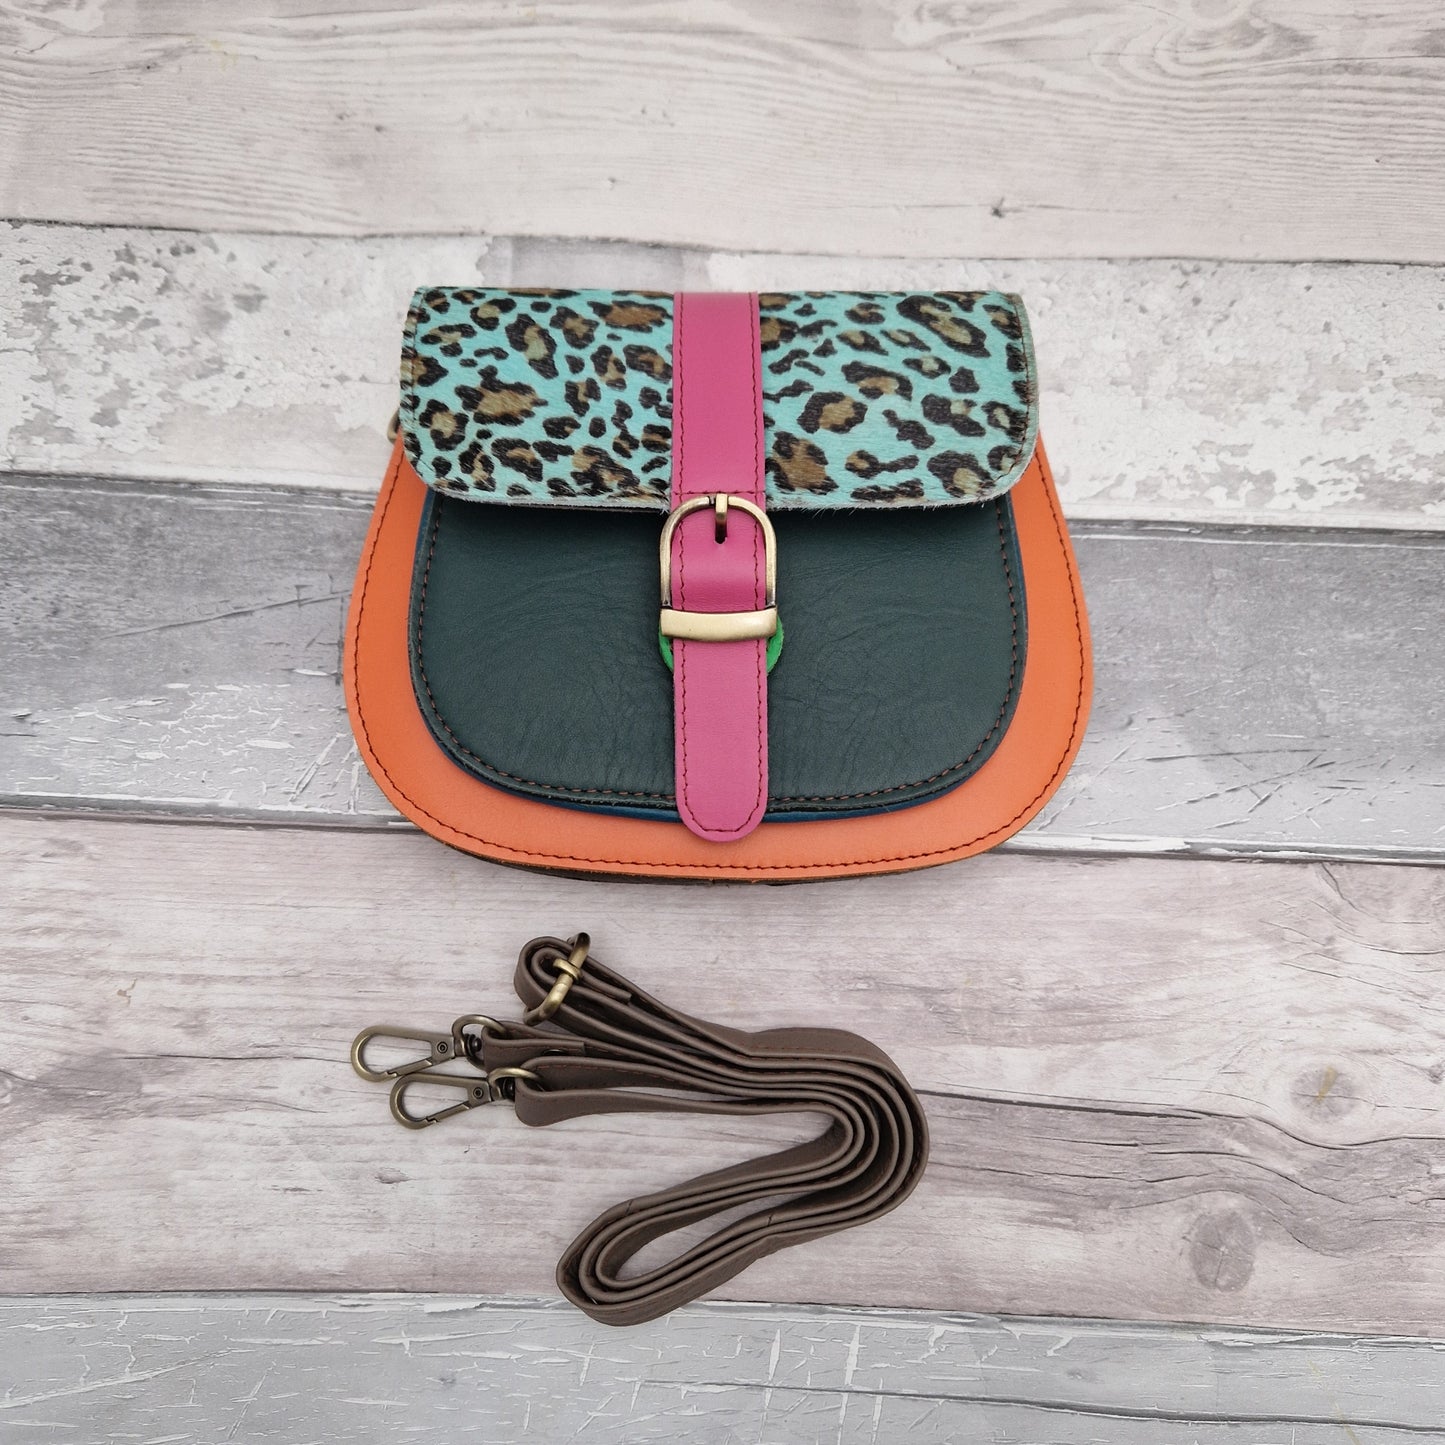 Saddle bag style, made from leather off cuts in bright colours with a textured panel of leopard print in blue.